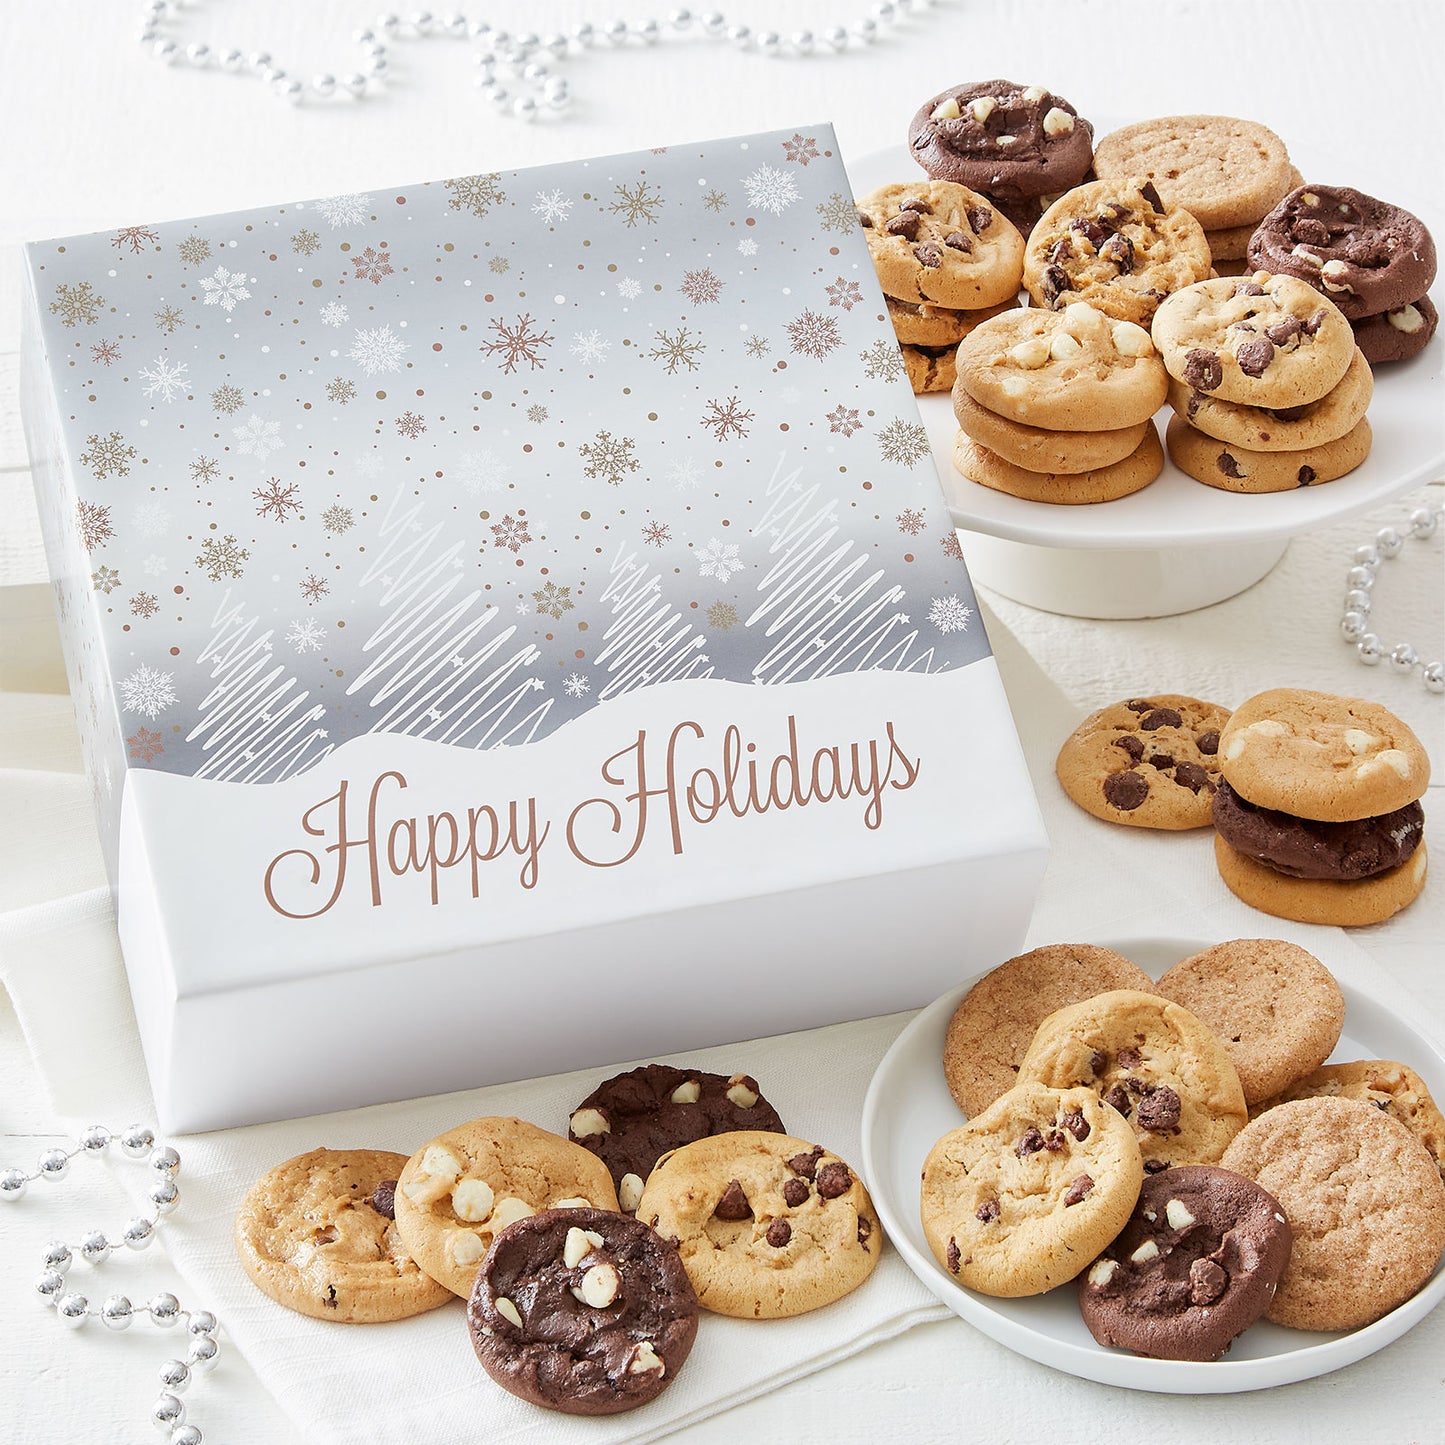 A Happy Holidays gift box decorated with a winter wonderland scene and surrounded by an assortment of Nibblers®